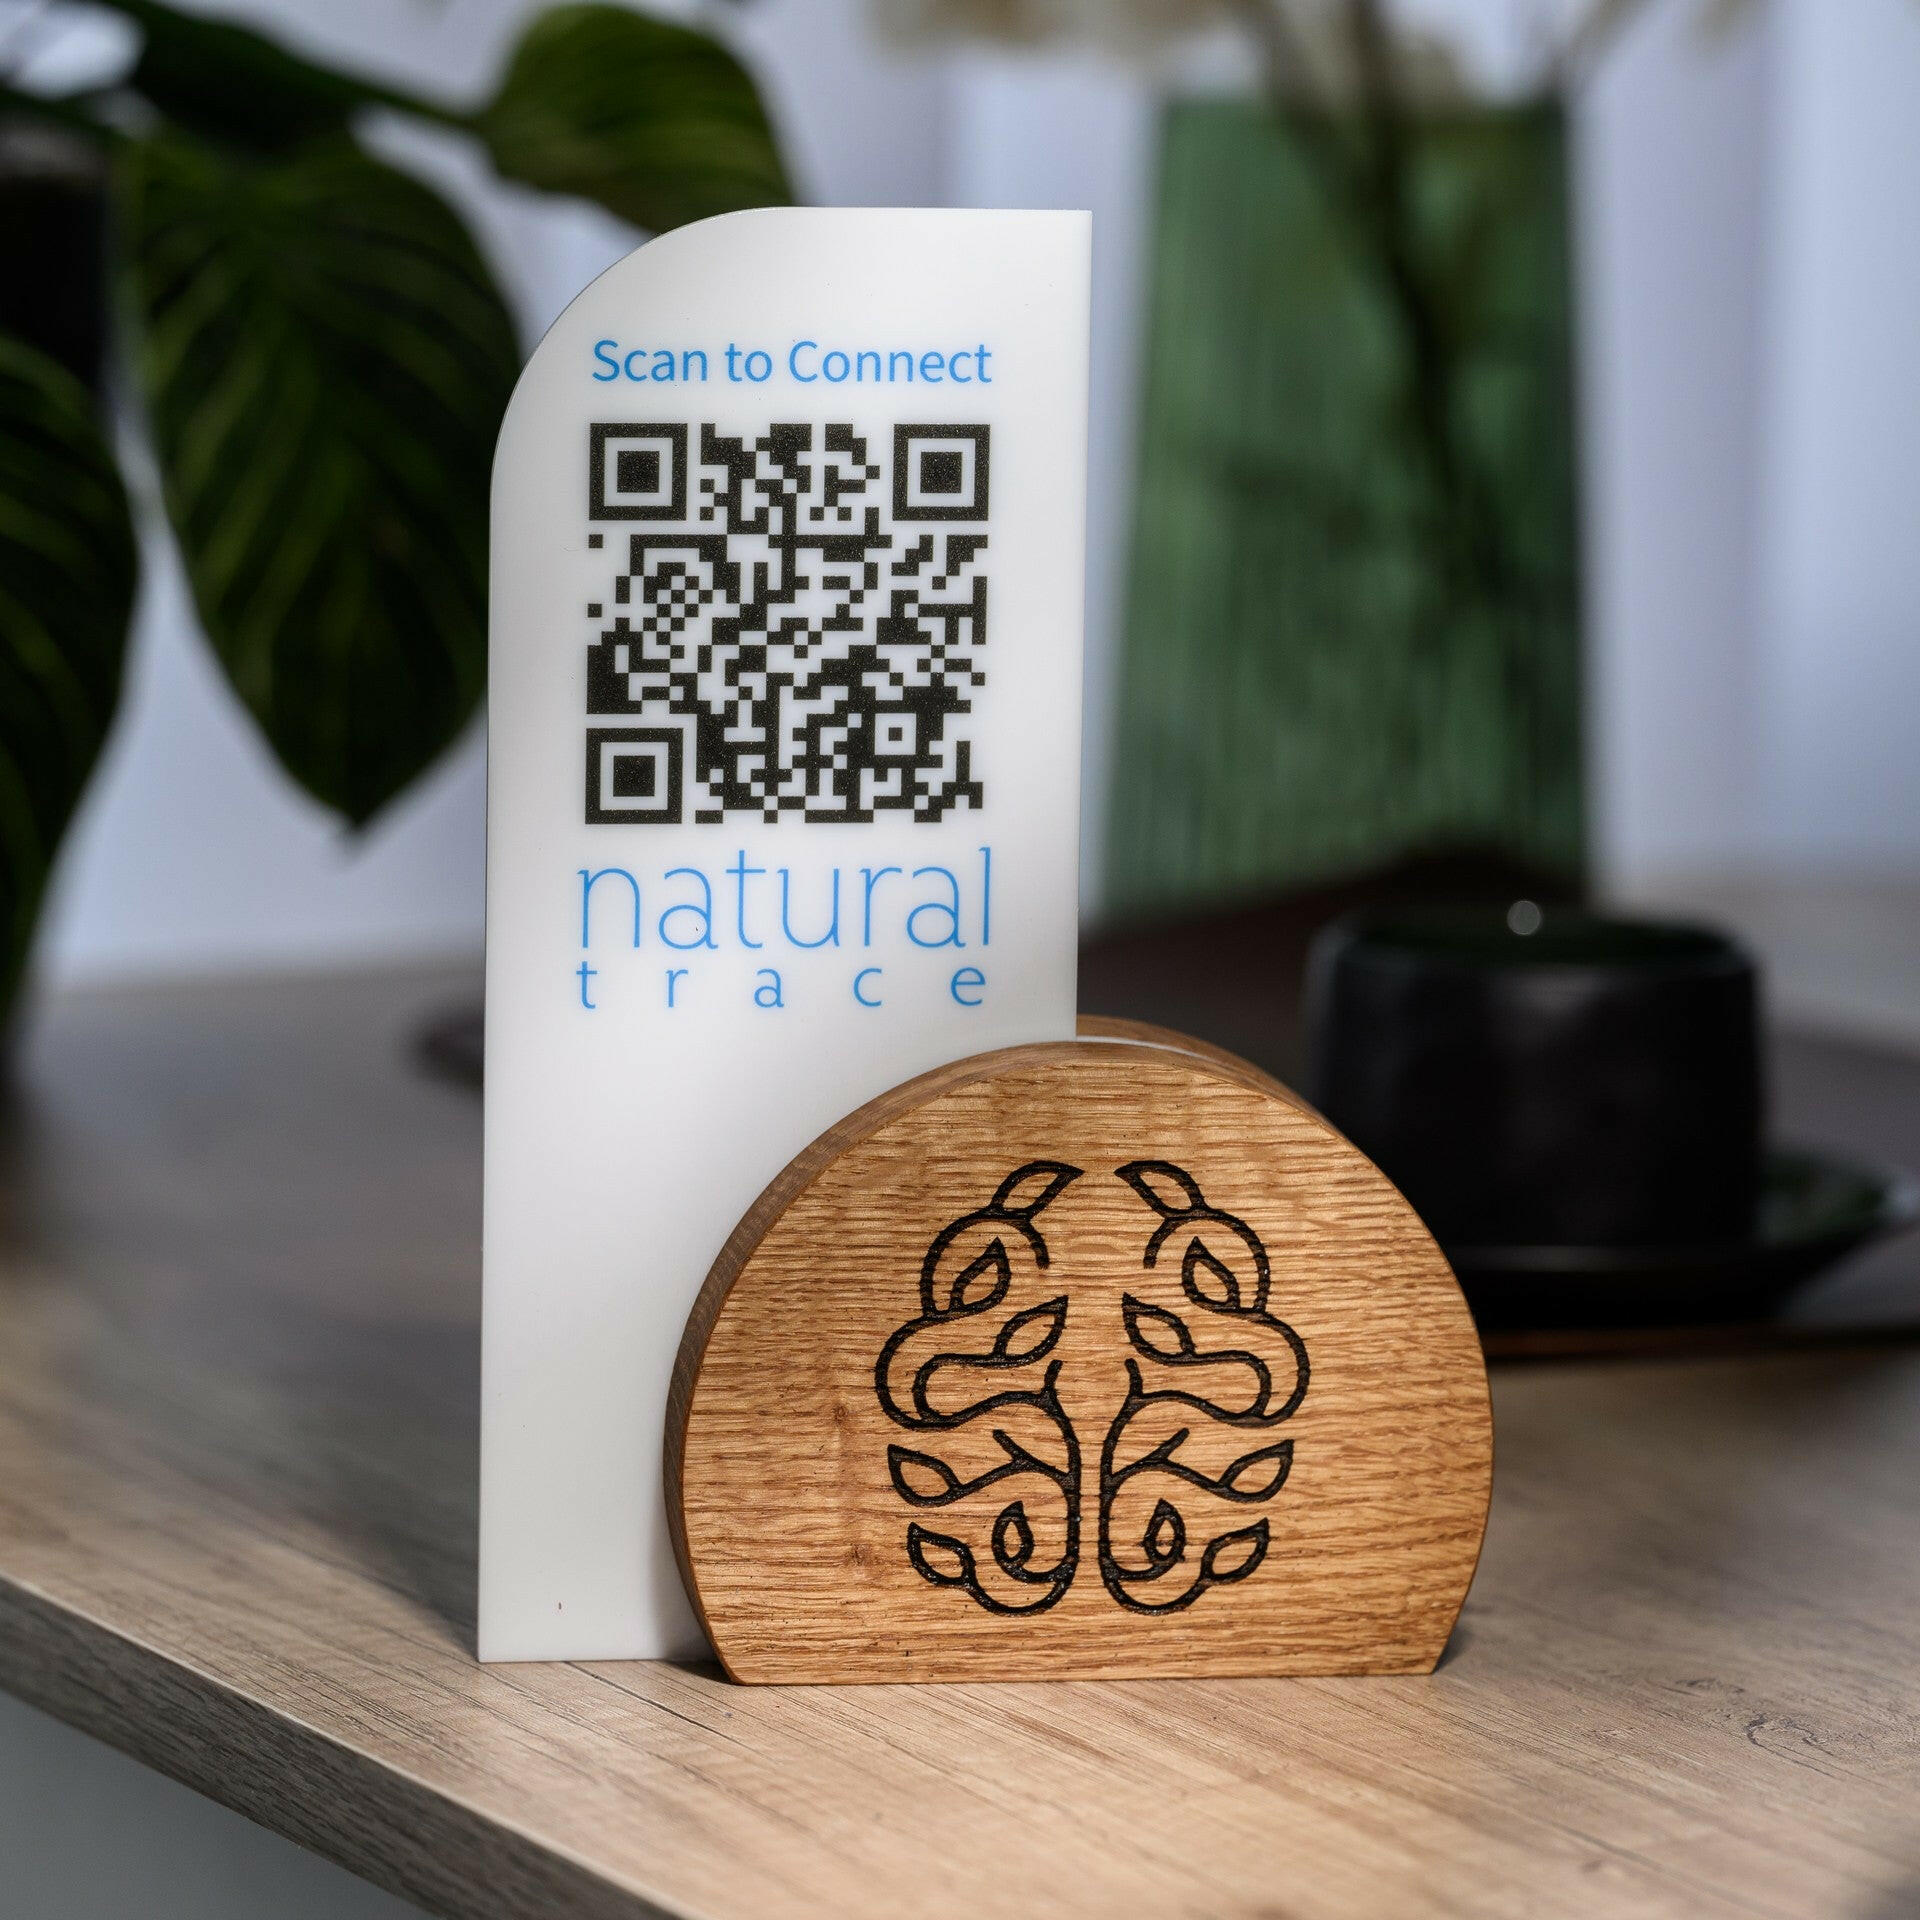 Sleek acrylic menu holder with QR code and logo, set on a wooden stand, perfect for showcasing menus and social media links.